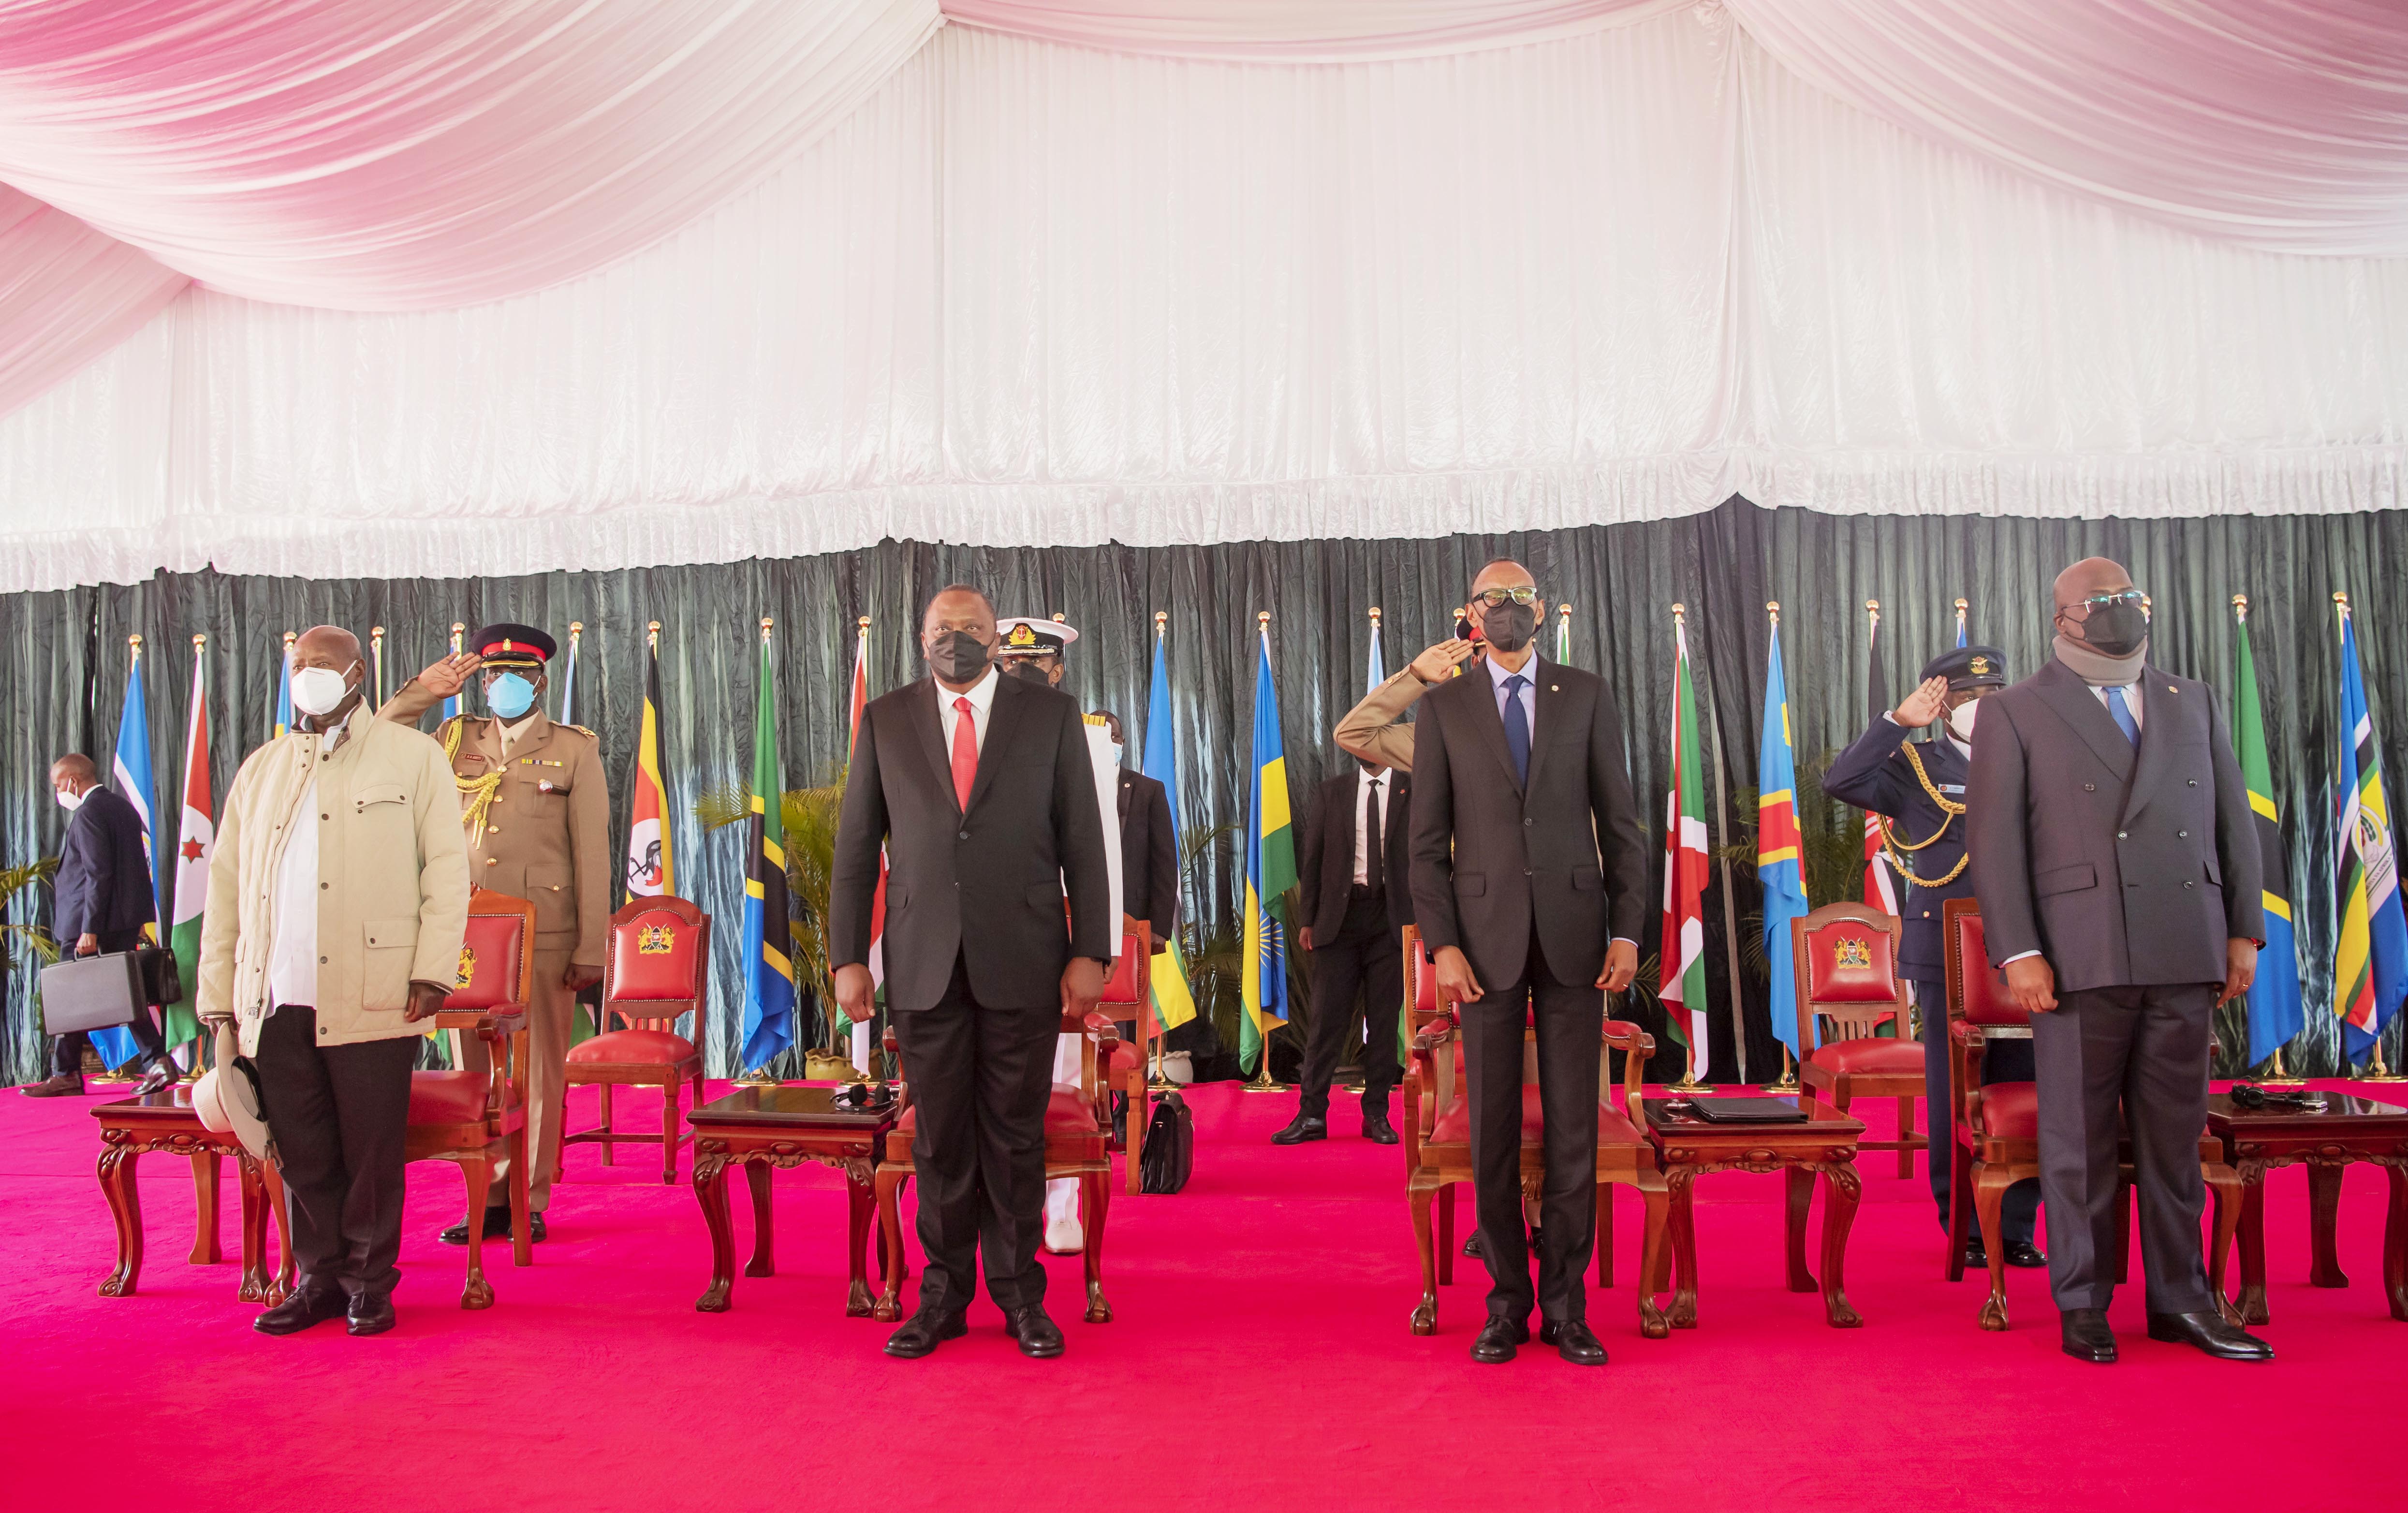 (L-R) Presidents Yoweri Museveni (Uganda), Uhuru Kenyatta (Kenya), Paul Kagame and  Fu00e9lix Tshisekedi (DR Congo)  during the Signing Ceremony of the Treaty of Accession by DR Congo to the East African Community in Nairobi on April 8, 2022. / Photo  by Village Urugwiro